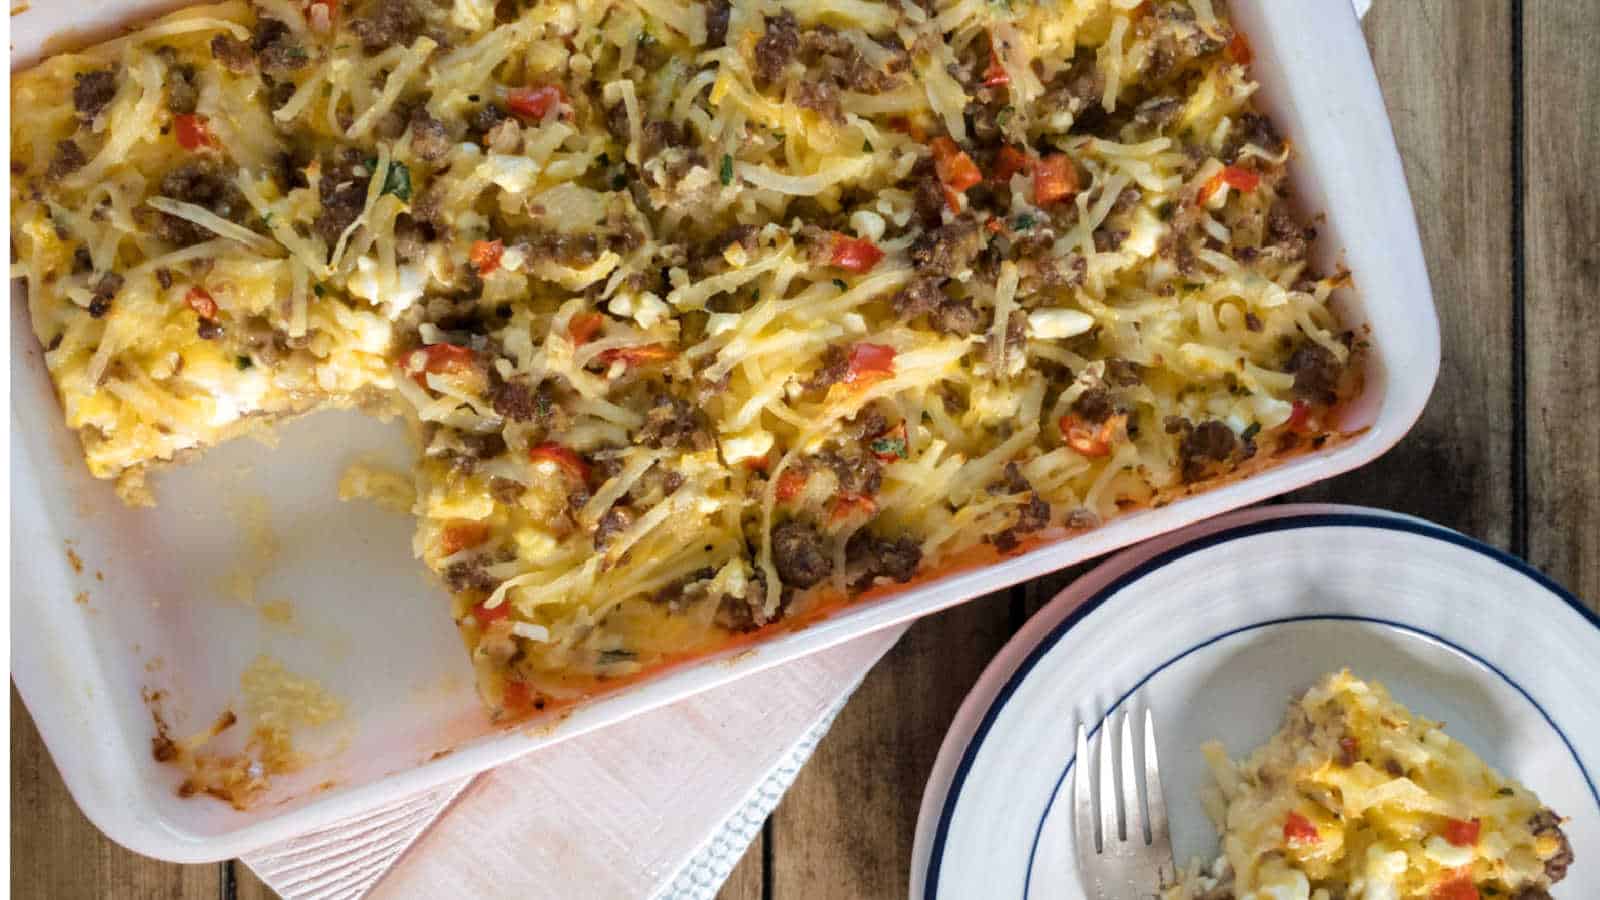 19 Unbelievably Good Casseroles That Make Any Night Special